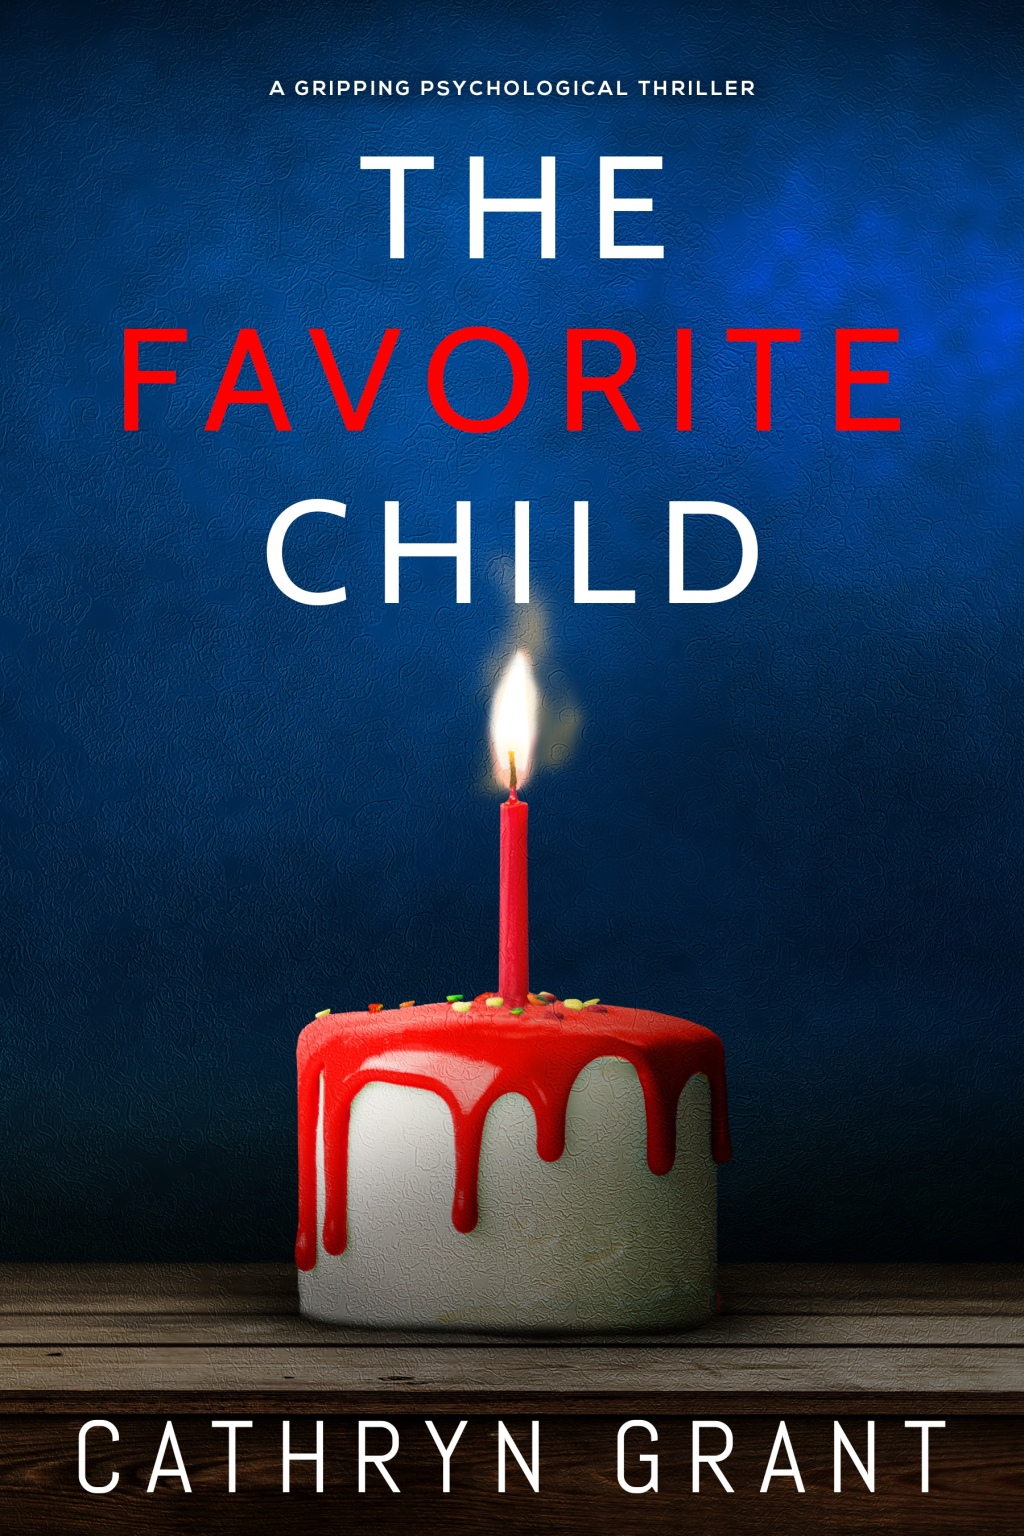 The Favorite Child by Cathryn Grant